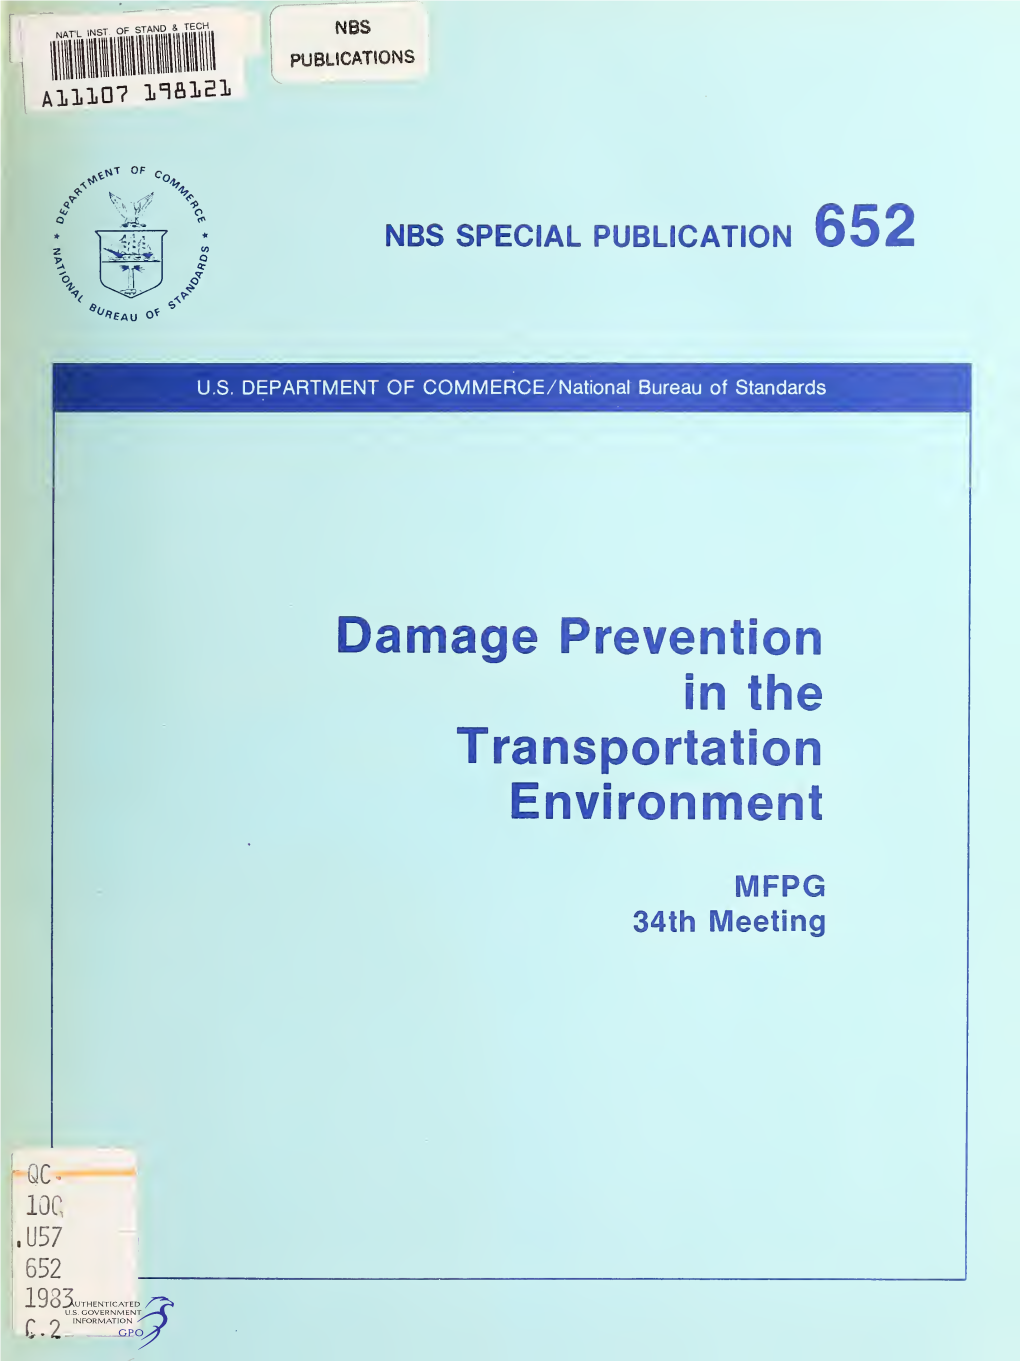 Damage Prevention in the Transportation Environment